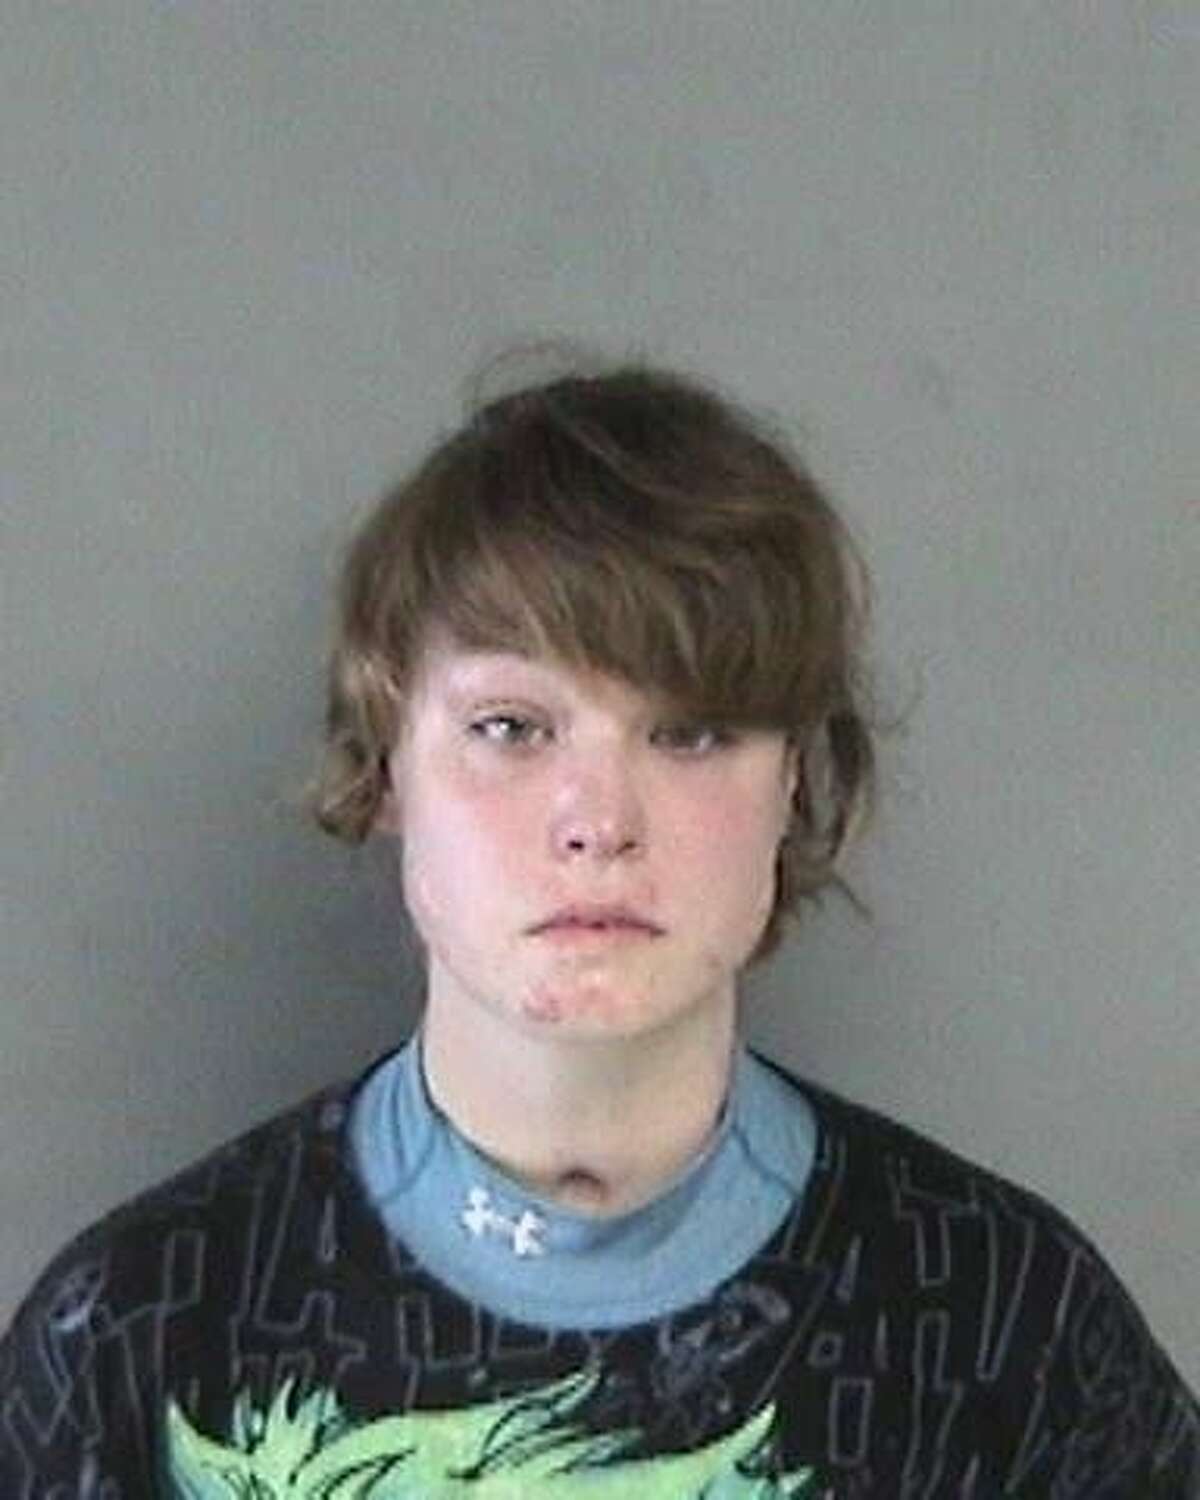 Lexie Miriyah Hutson, 23, was arrested on suspicion of of murder and manufacturing a controlled substance on June 14, 2012 after an explosion in her Livermore home killed one person